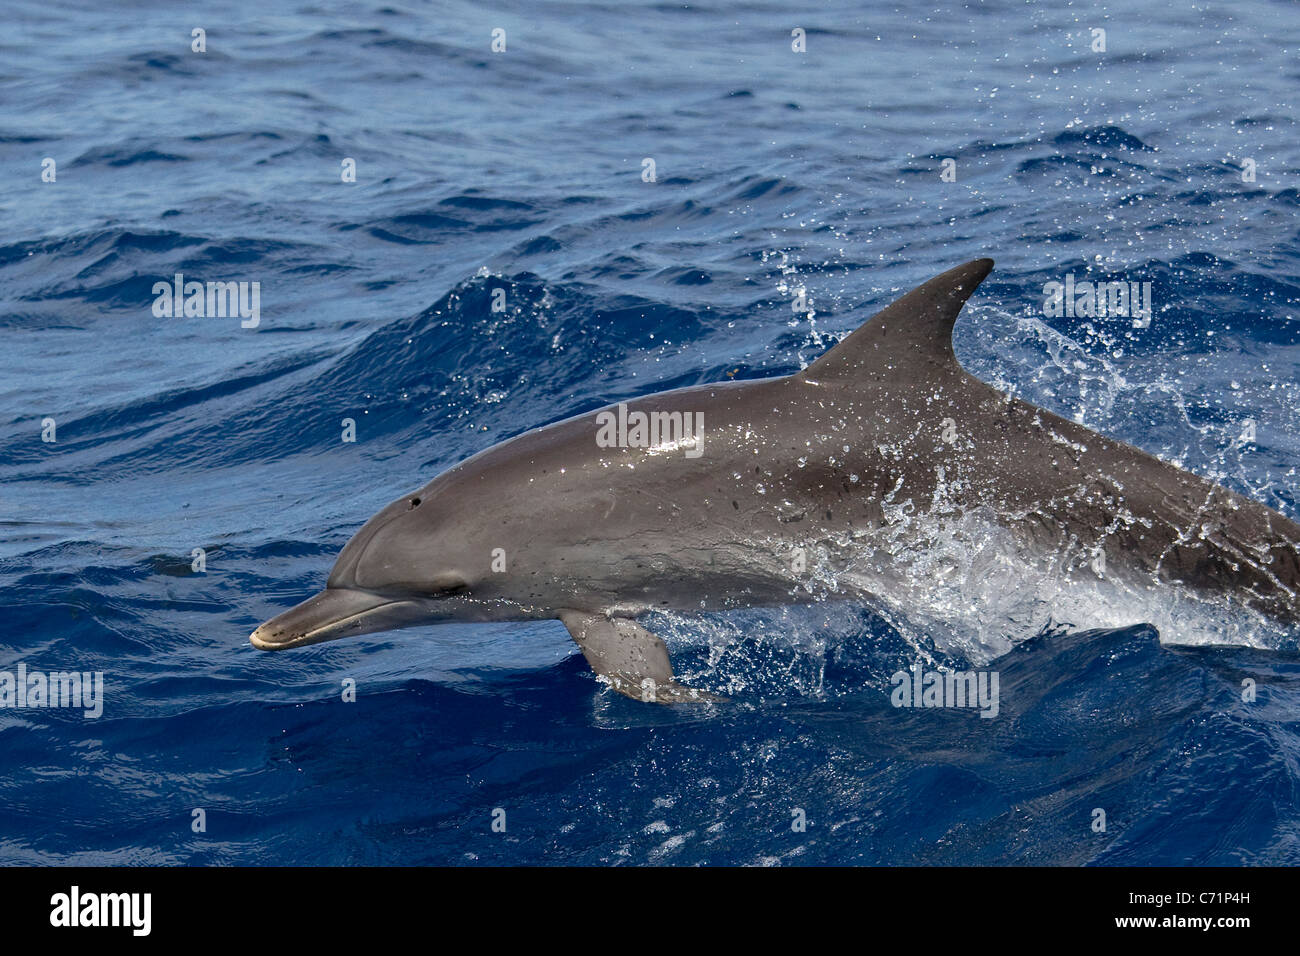 Dolphin, Spotted dolphin, Stenella attenuata, leaping and playing in ocean, dolphin leaping, wild dolphin Stock Photo